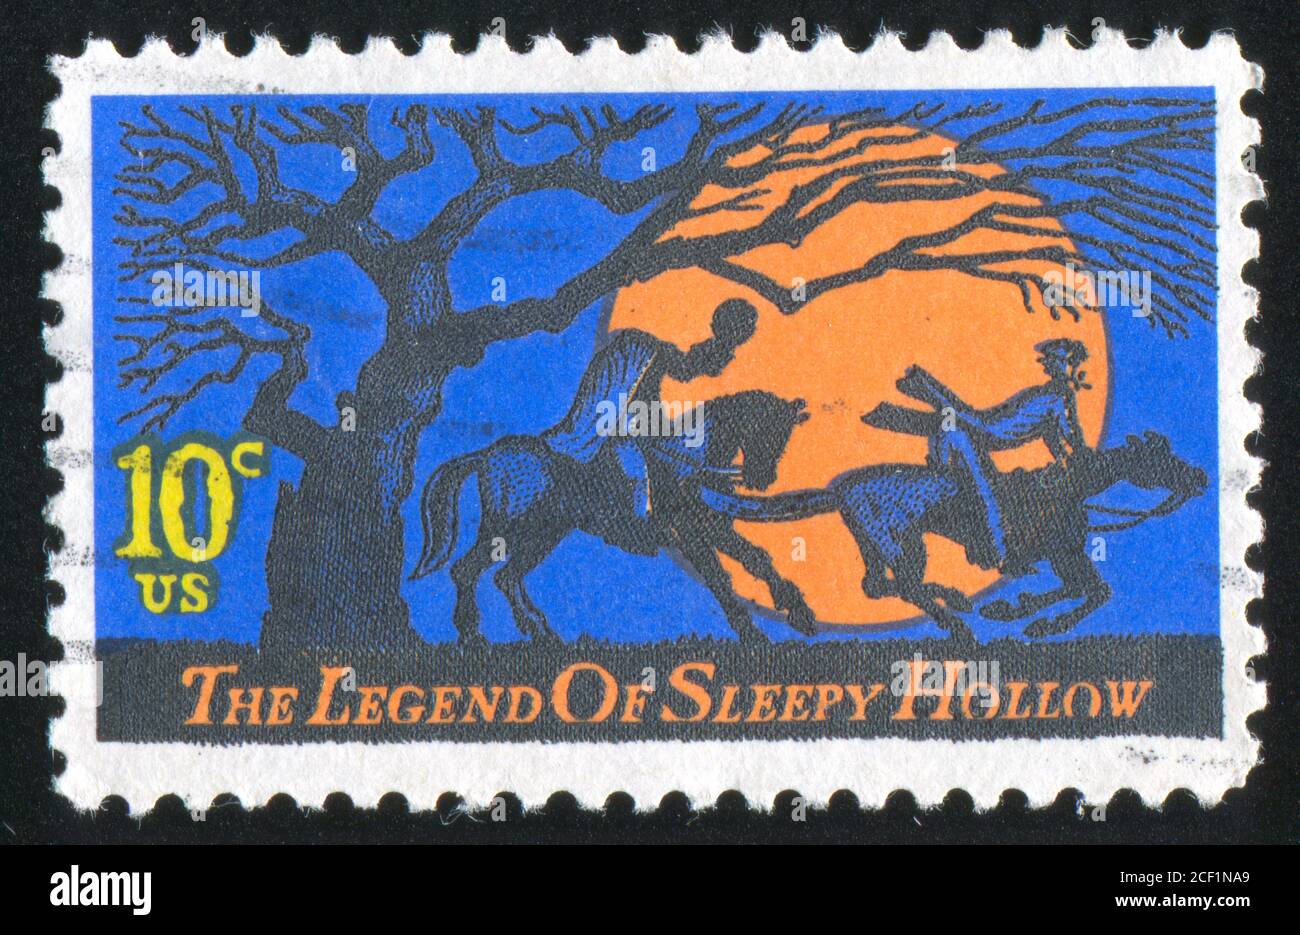 UNITED STATES - CIRCA 1974: stamp printed by United States of America, shows legend of Sleepy Hollow, circa 1974 Stock Photo